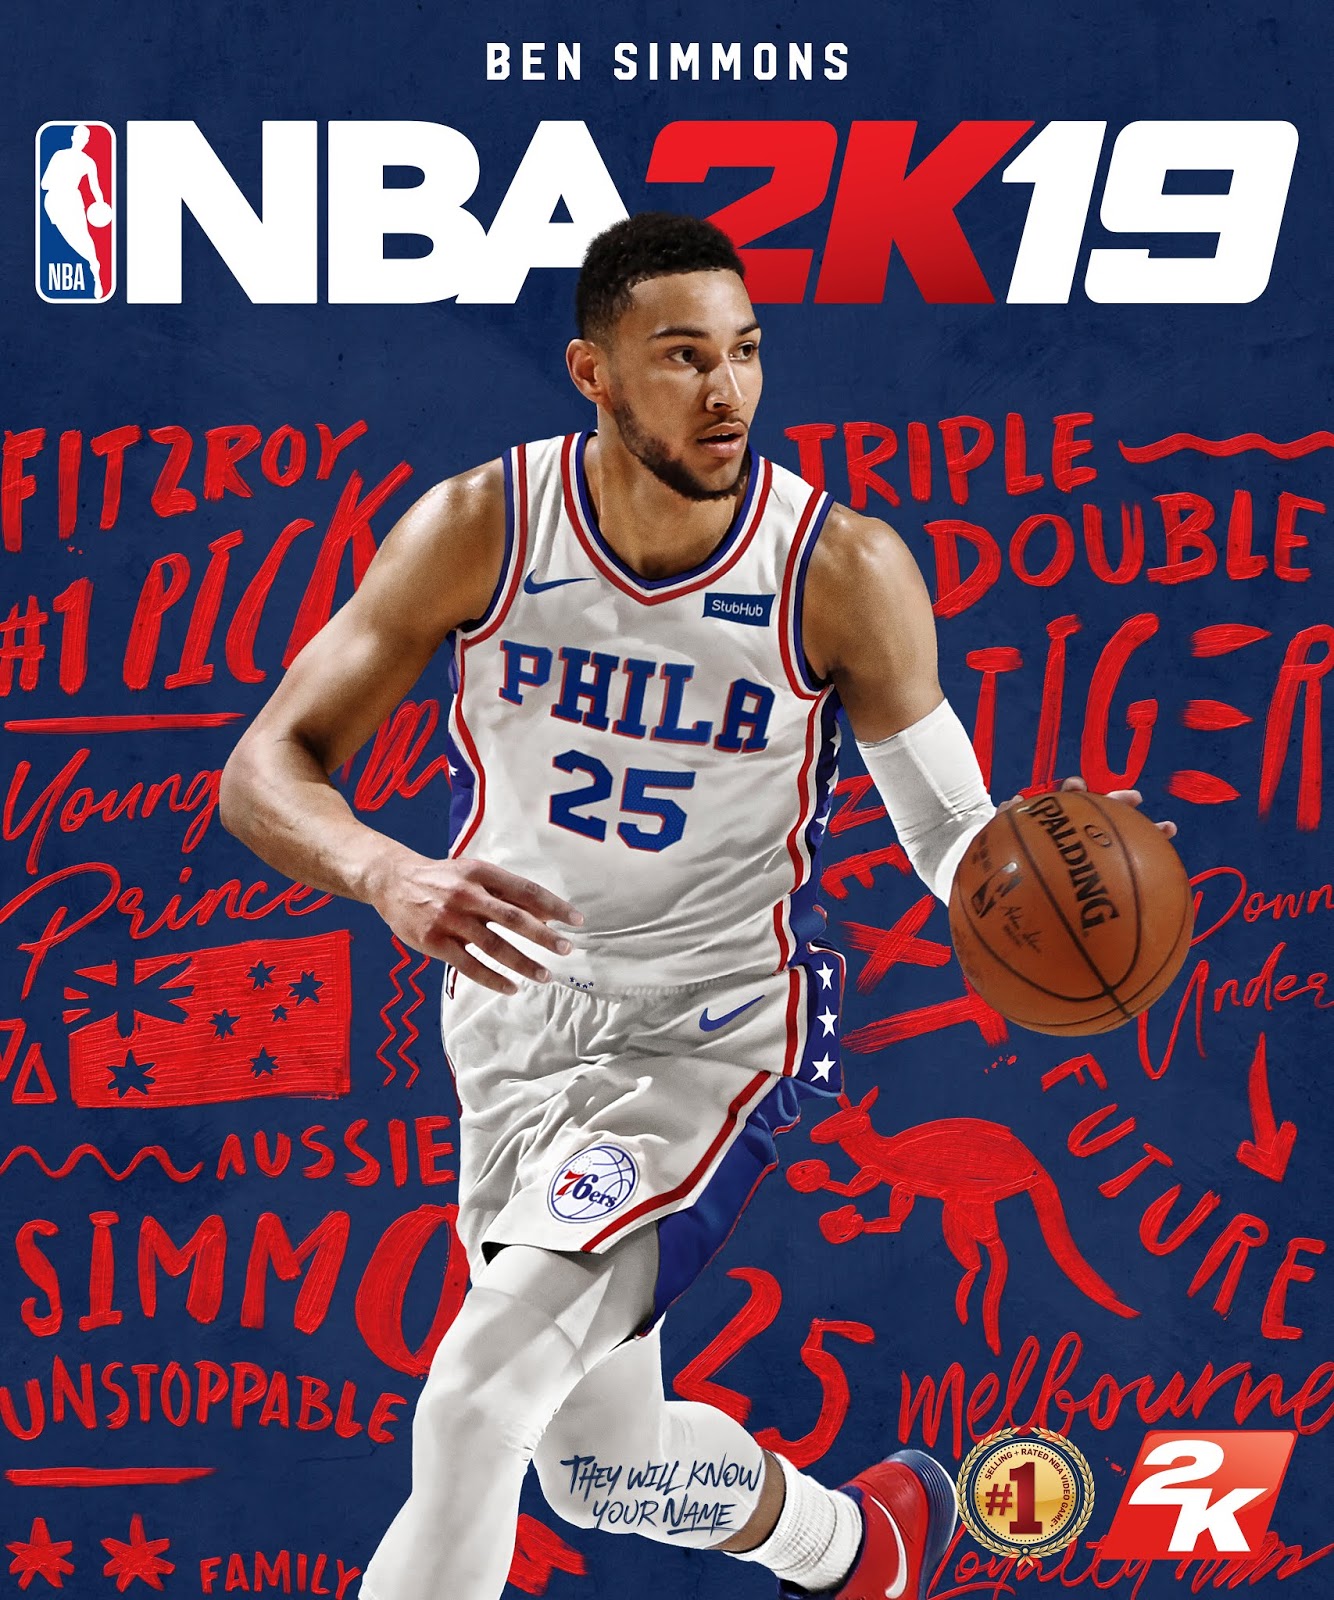 Ben Simmons is the cover athlete for NBA 2K19 MaxiGeek